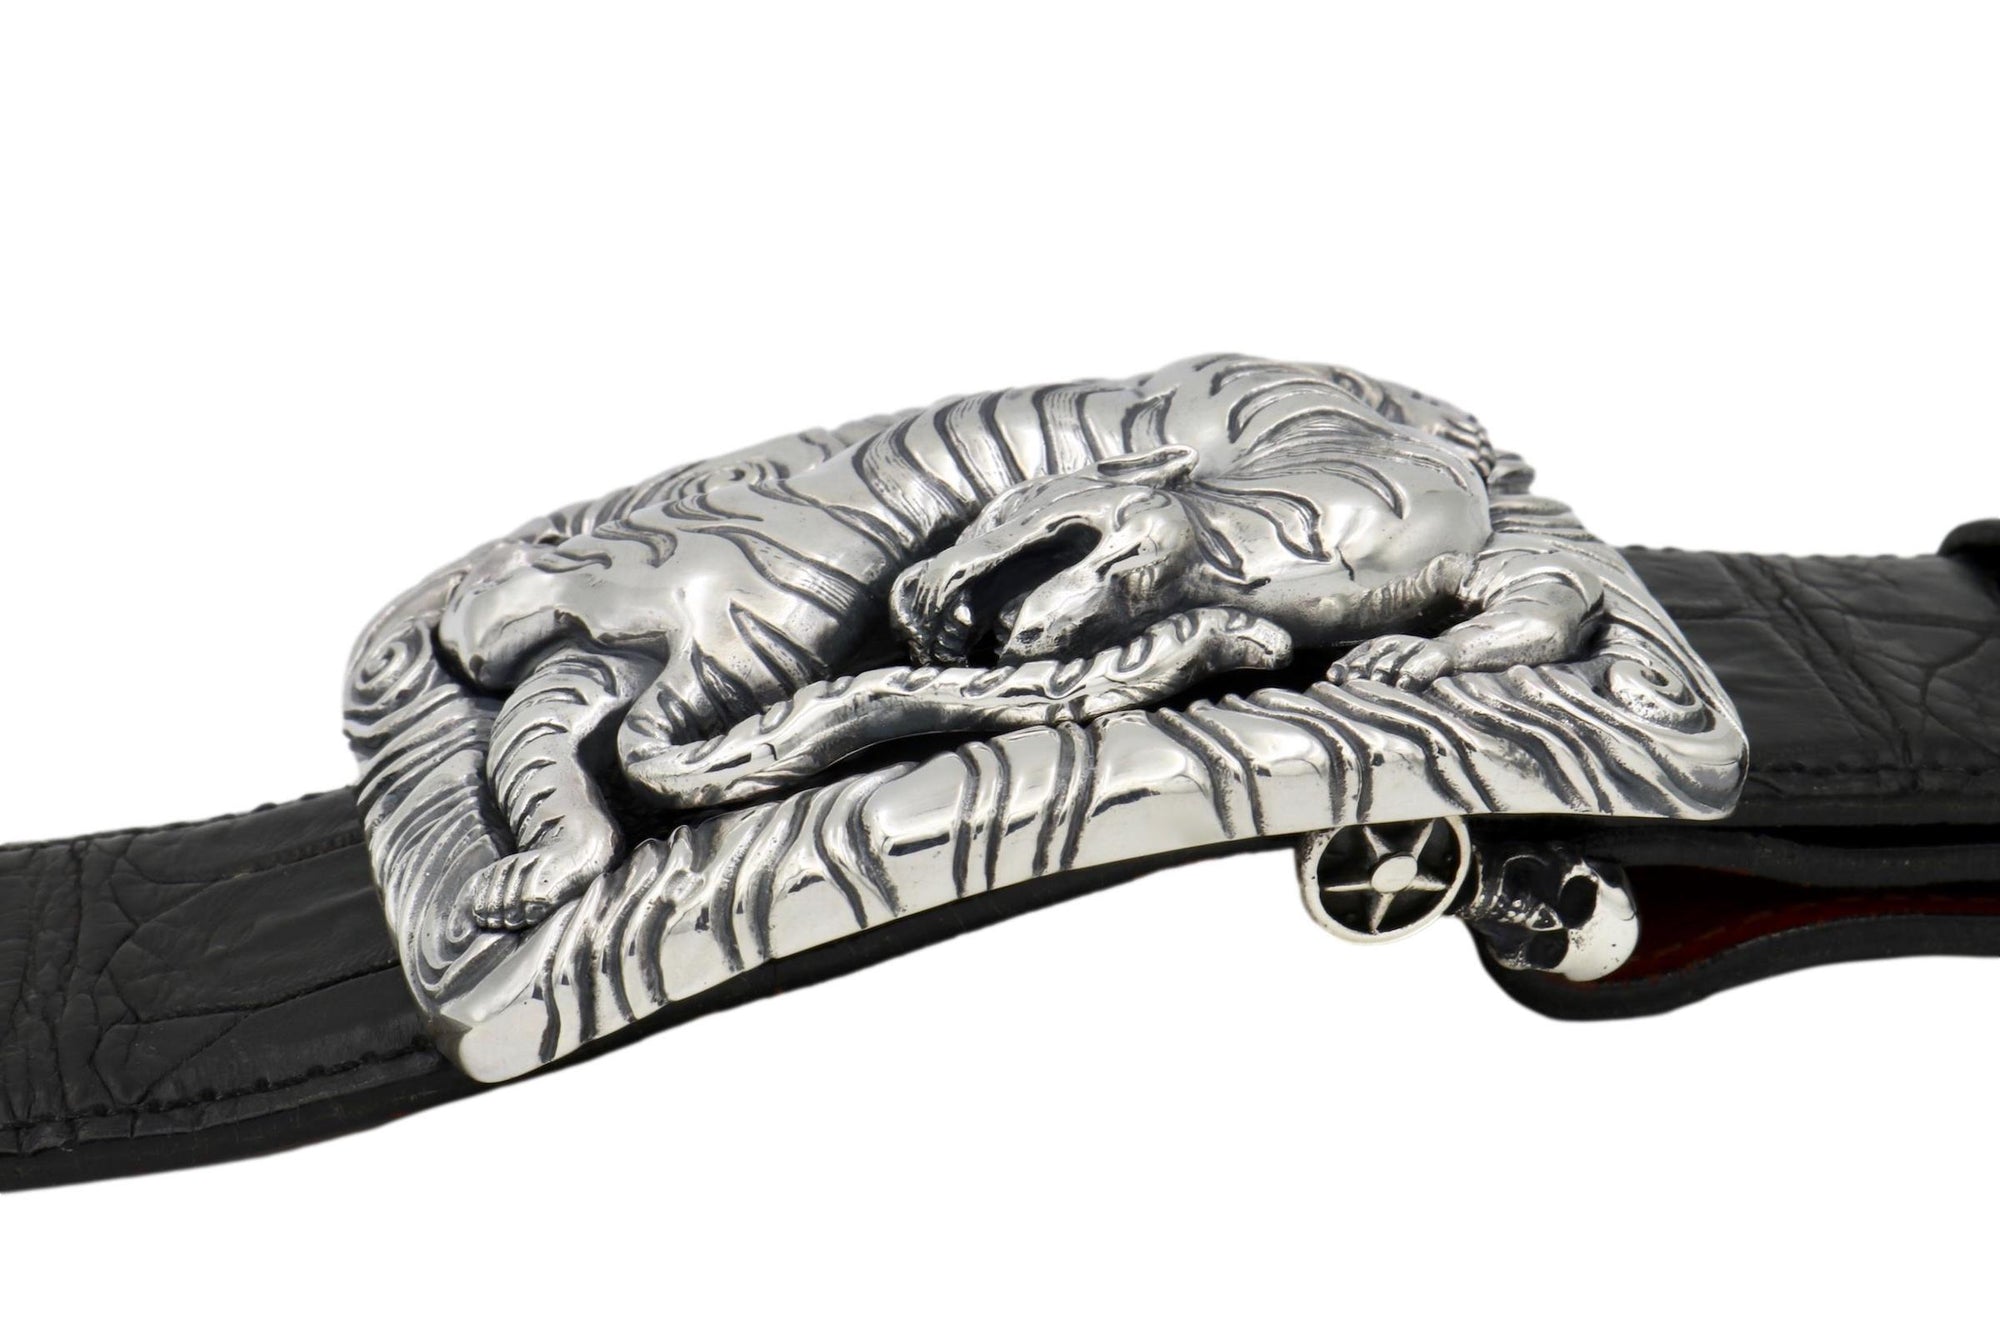 Front view of the Back Flipping Tiger buckle, showing the Tiger set into the elaborately carved surrounding frame. On a black alligator belt.